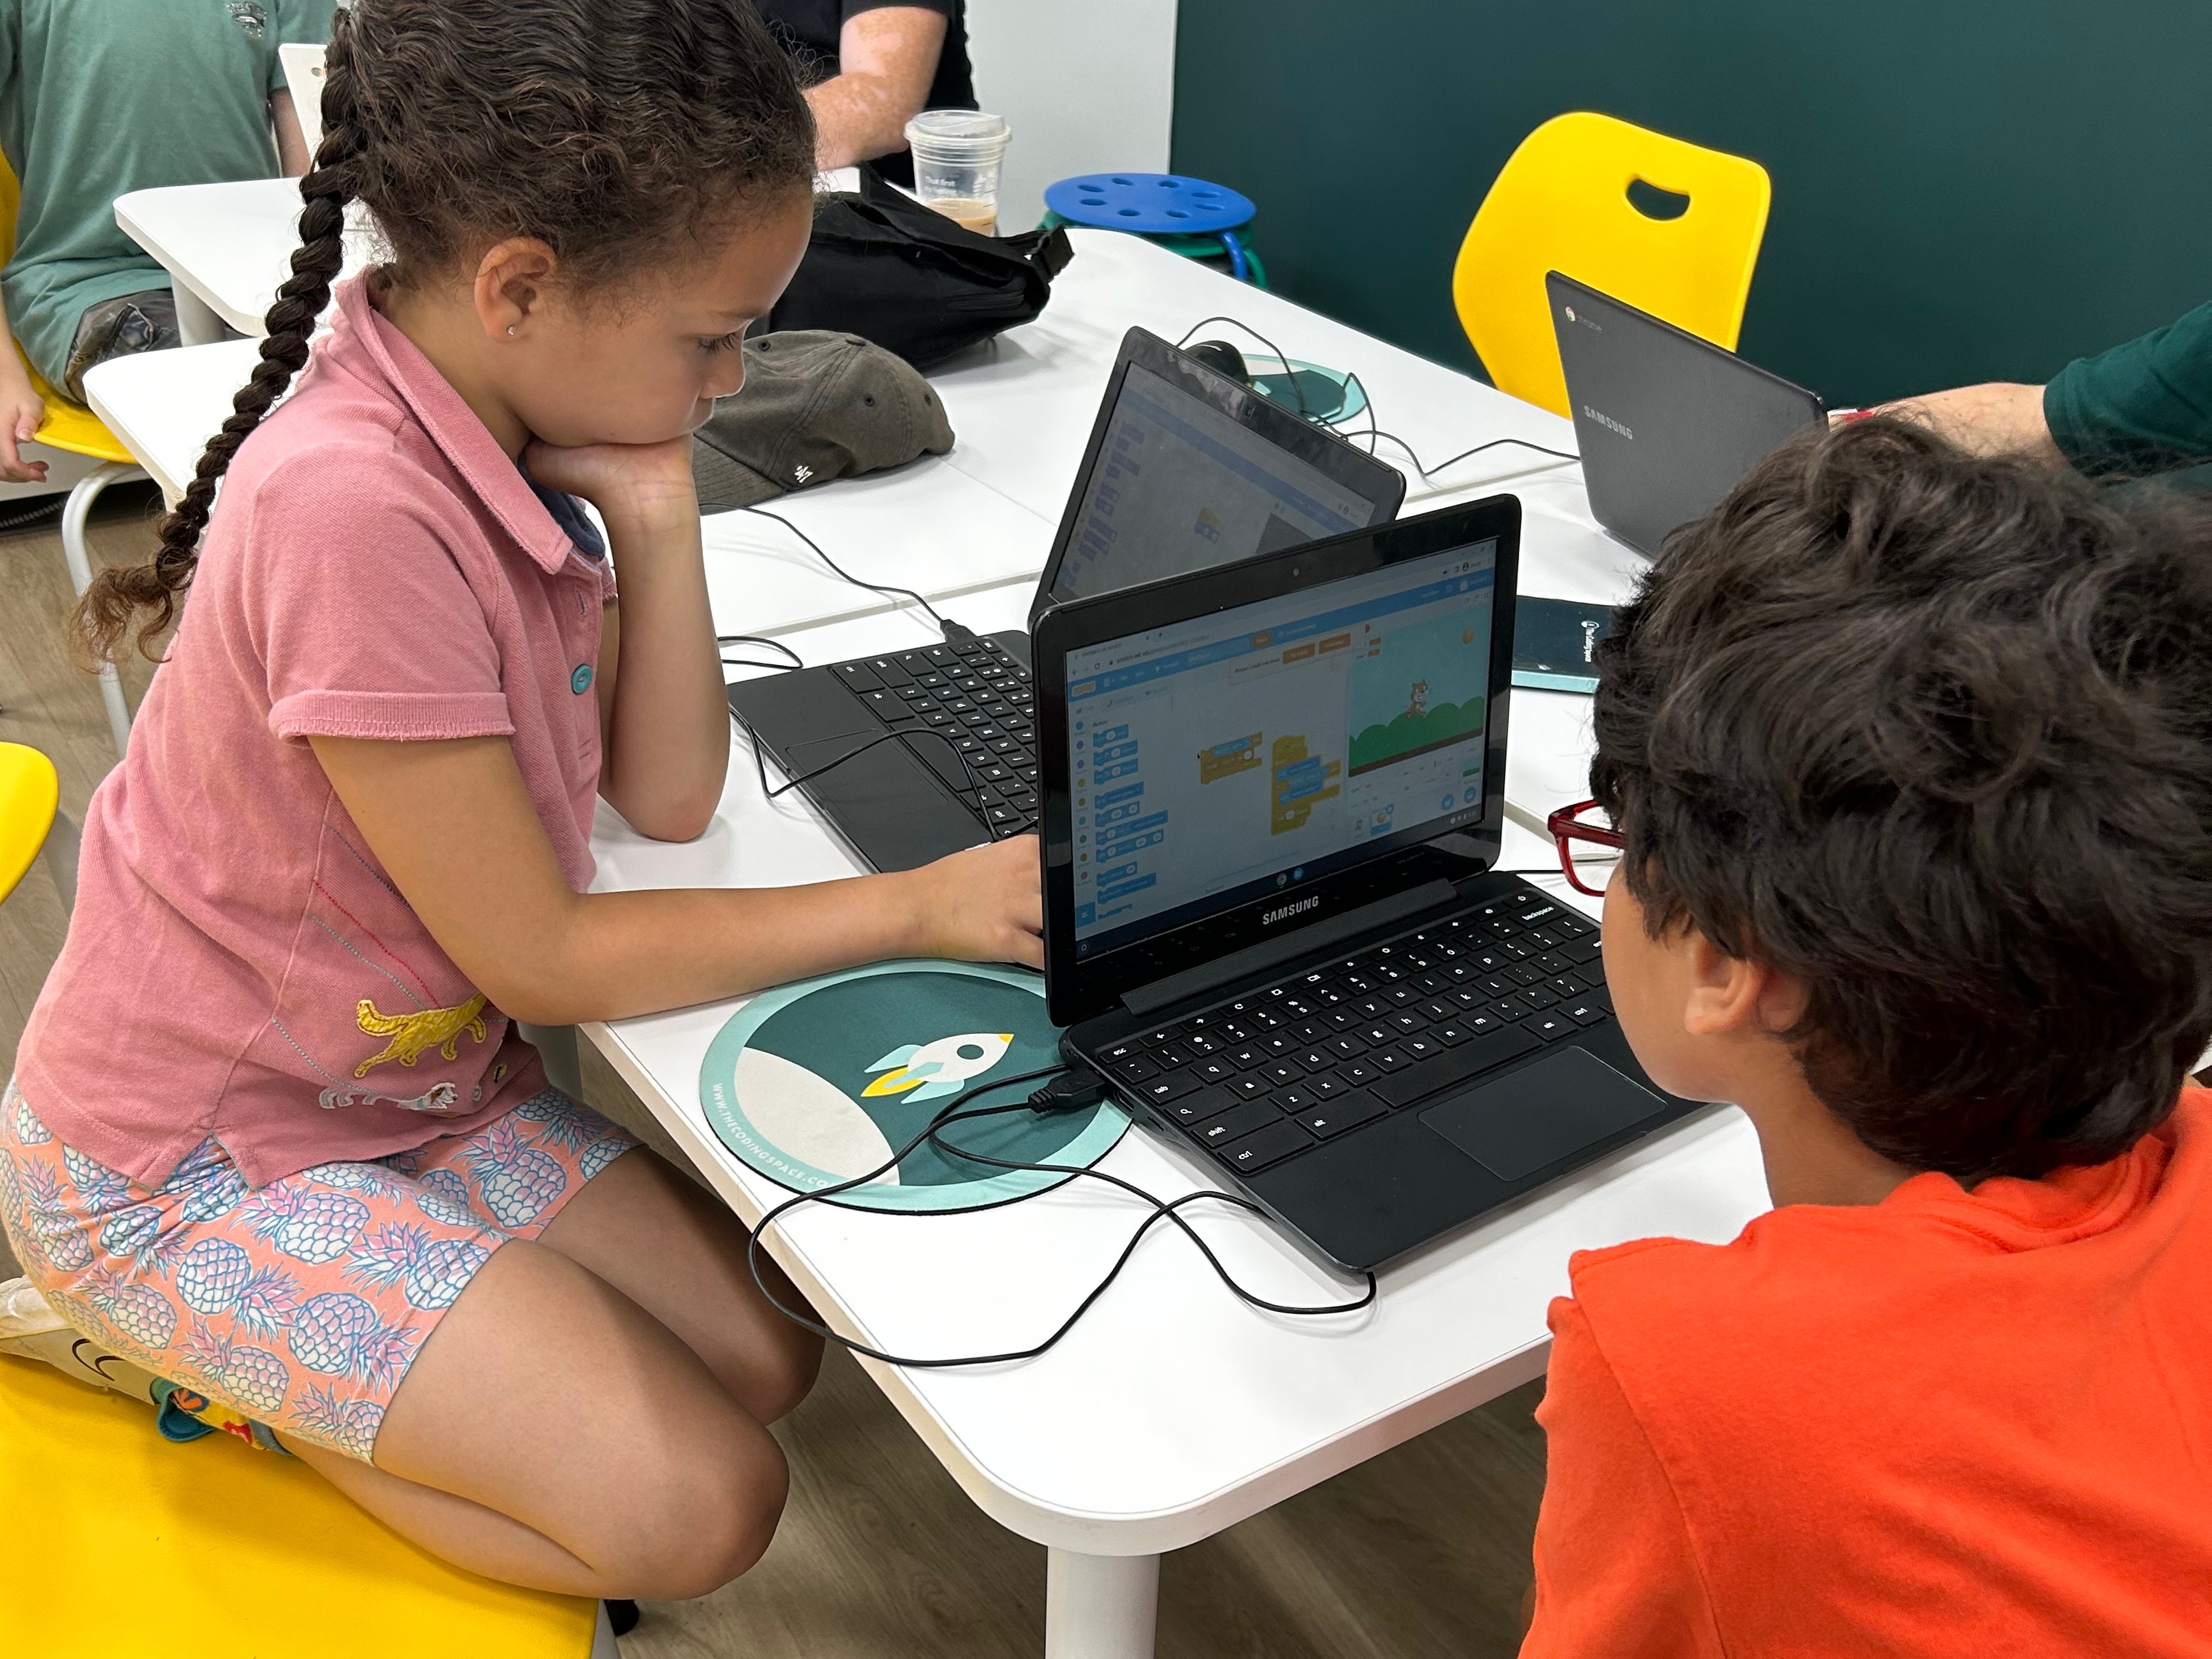 Students coding in a classroom